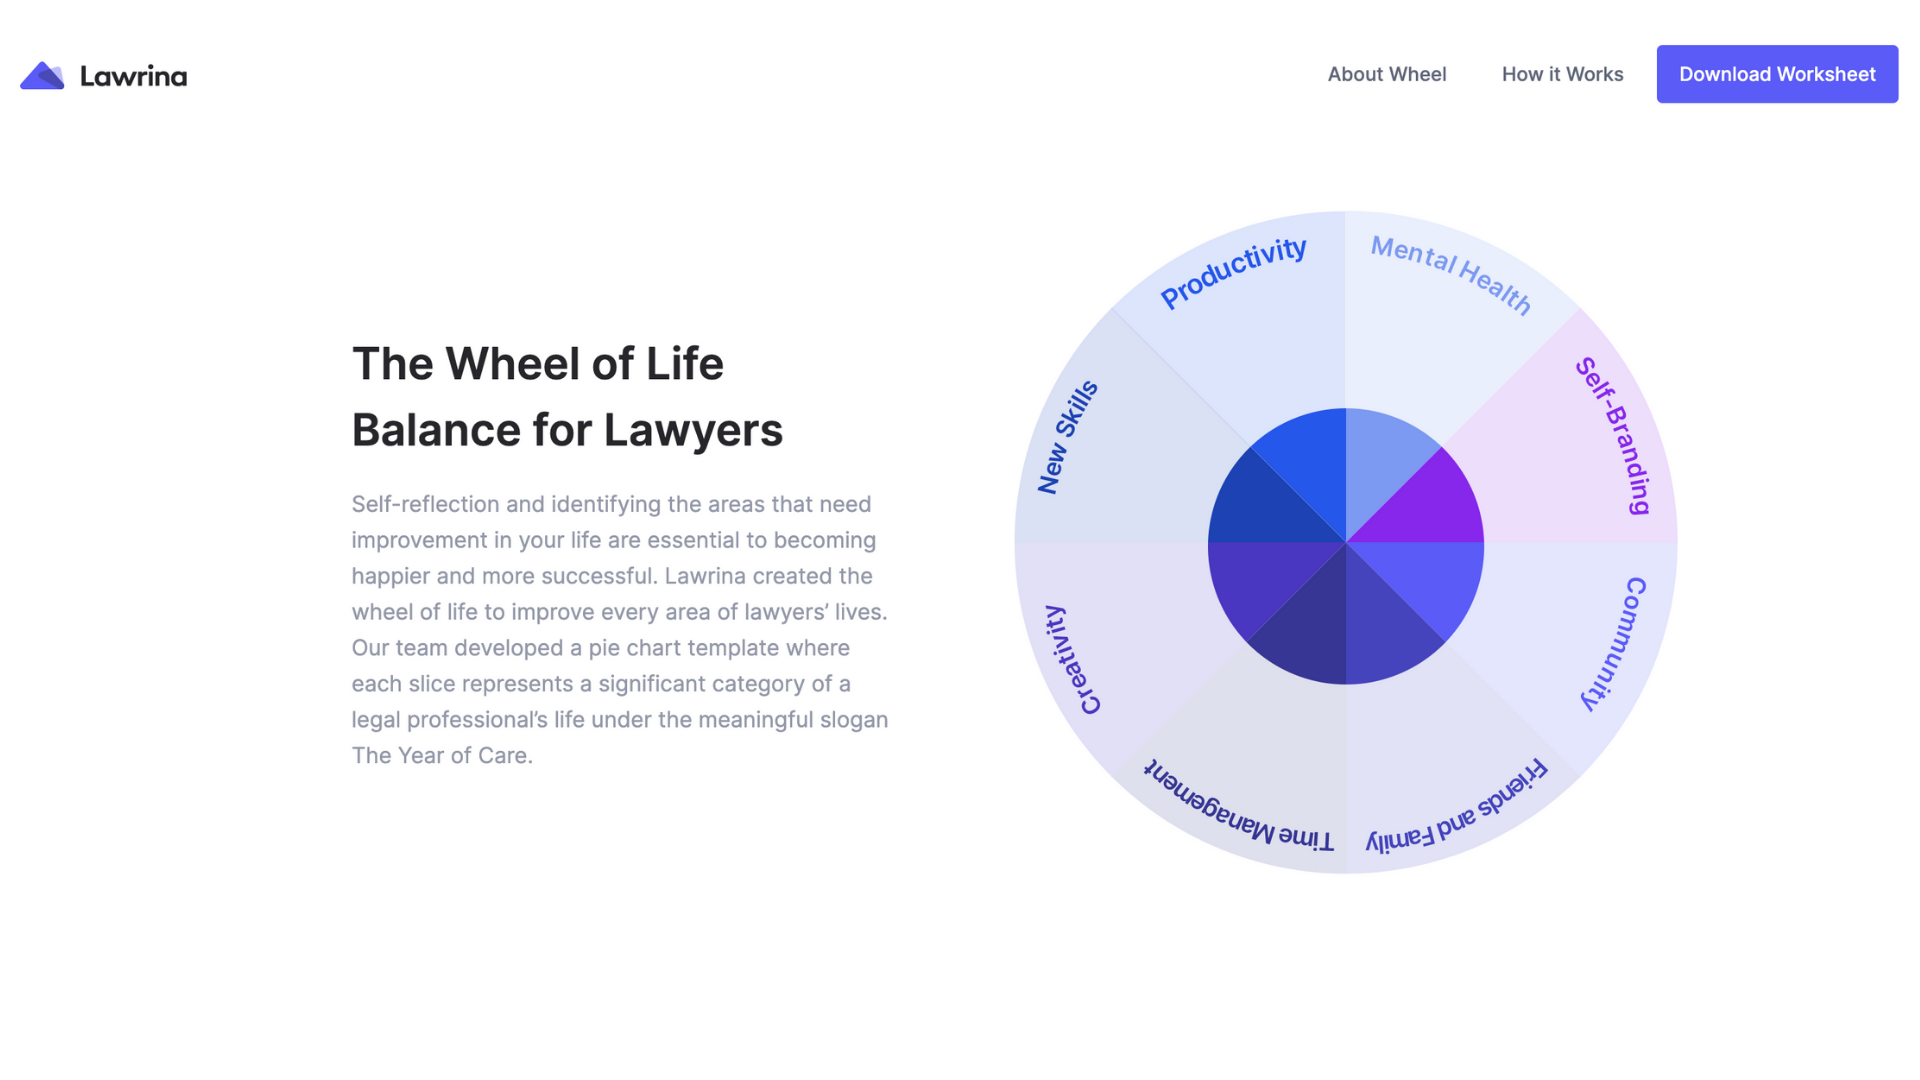 The Wheel of Life for Lawyers; graphic courtesy of Lawrina.